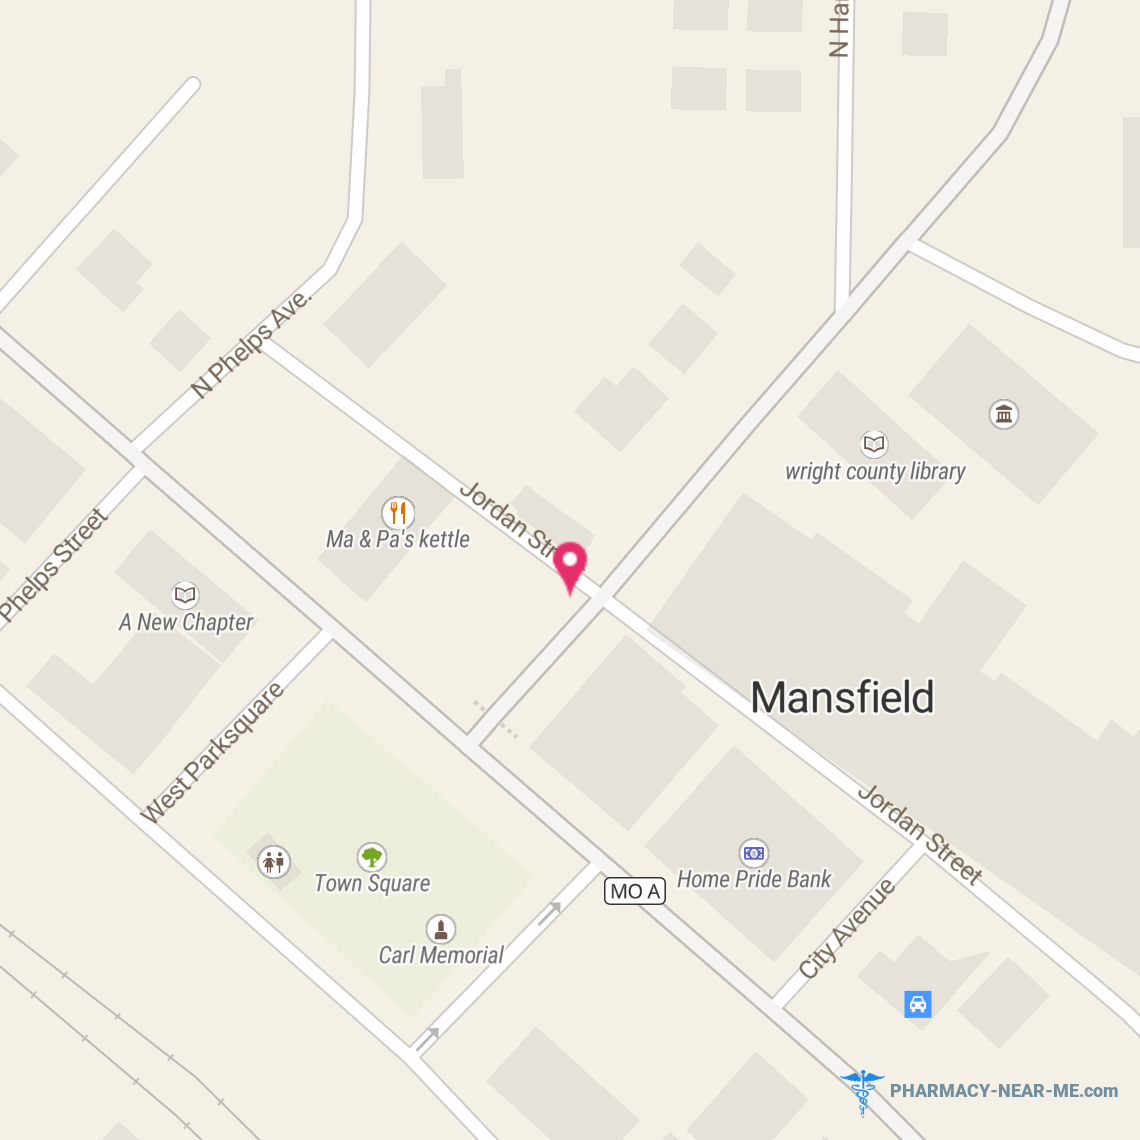 MANSFIELD DRUG #15731, POWERED BY WALGREENS - Pharmacy Hours, Phone, Reviews & Information: 101 N Business 60, Mansfield, Missouri 65704, United States